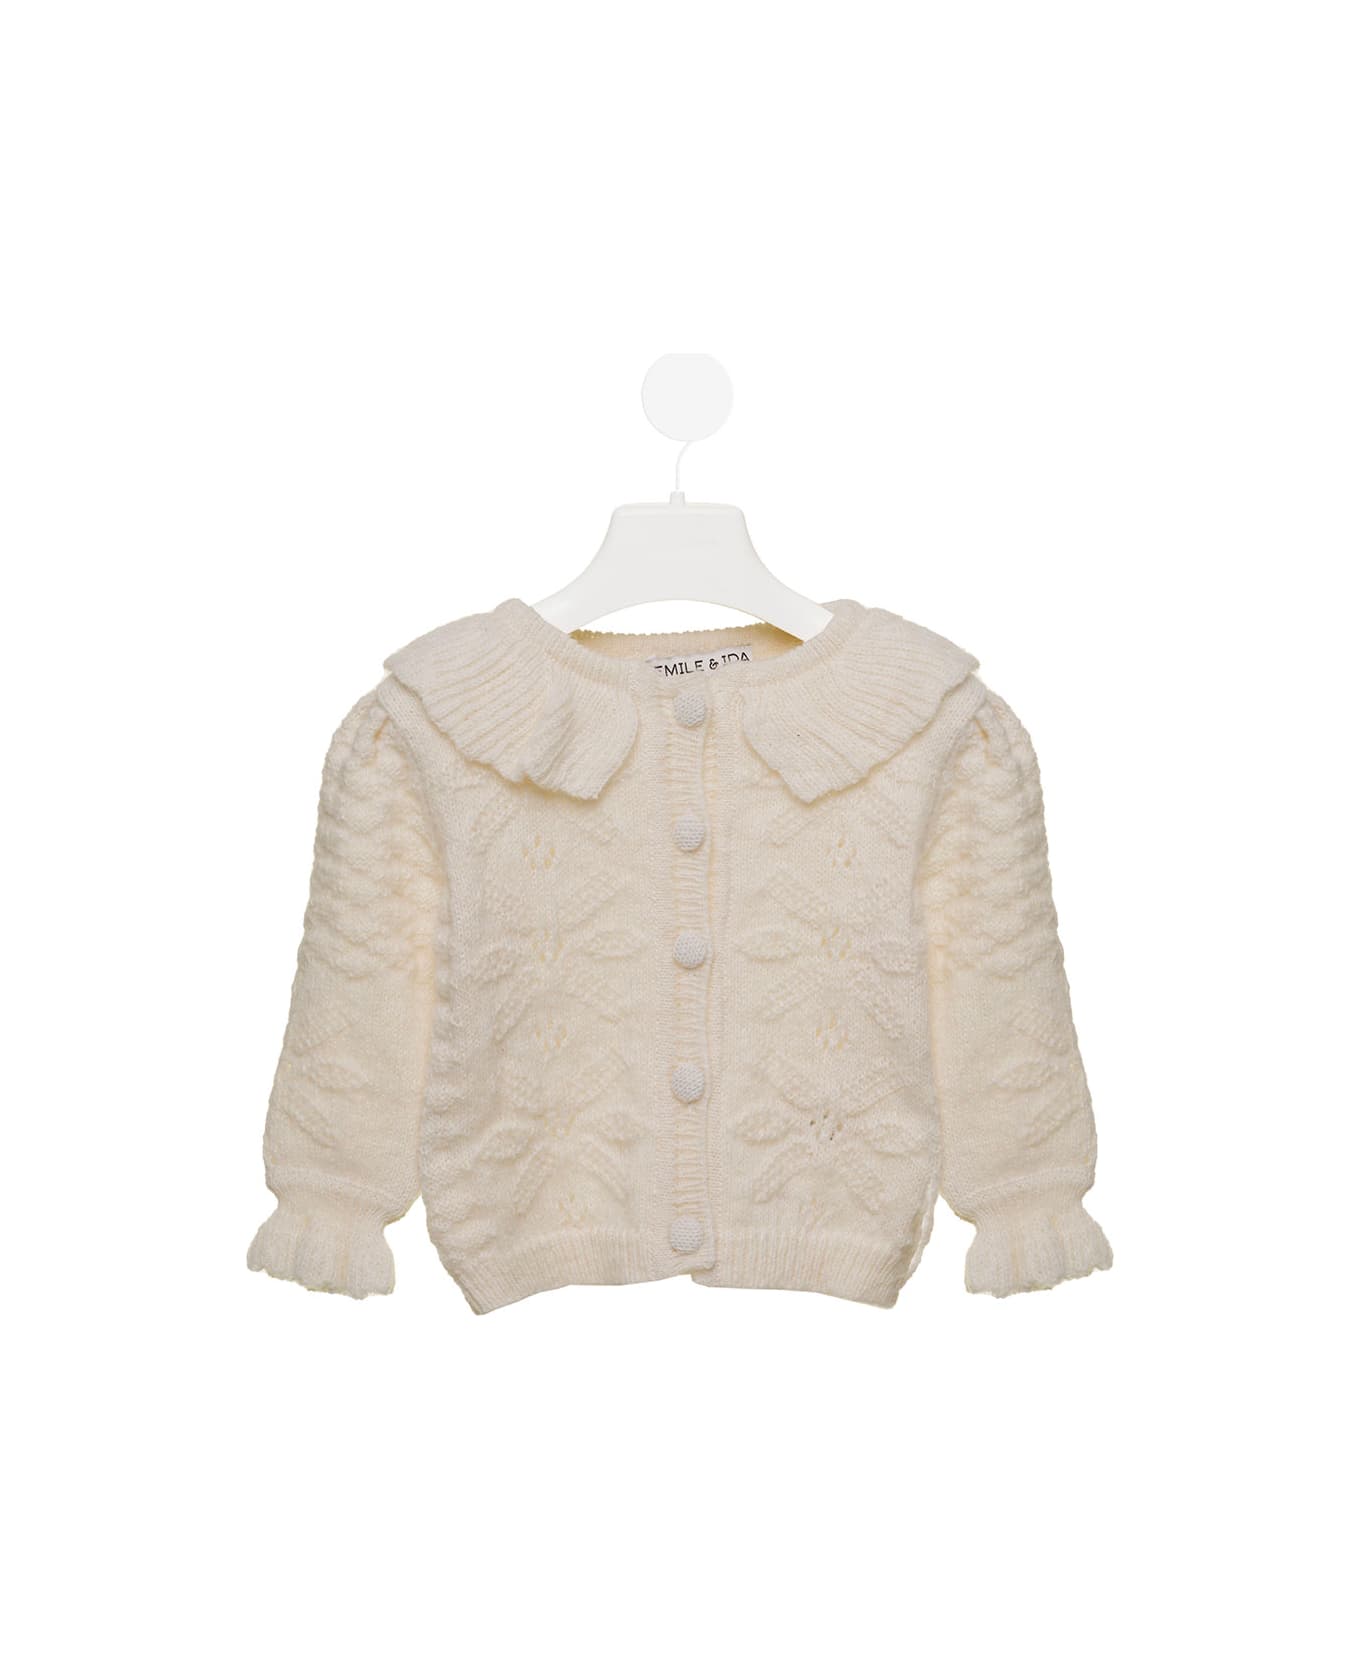 Emile Et Ida Kids Baby's White Cardigan With Embroidery And Flounces - Beige